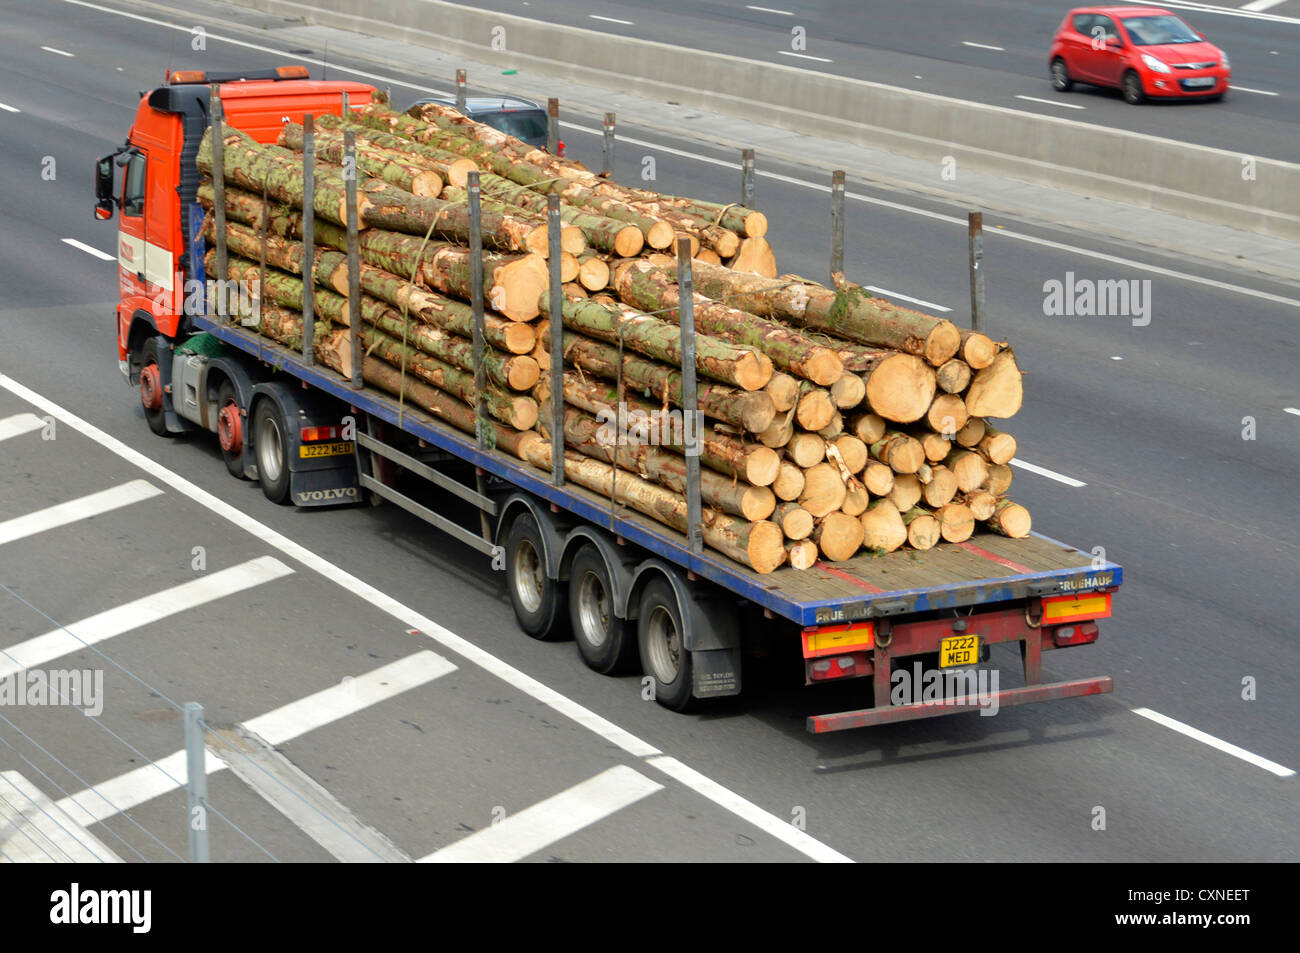 Side & back view of haulage business hgv lorry truck with articulated flat bed trailer load of cut lengths of tree trunk timber logs on UK motorway Stock Photo